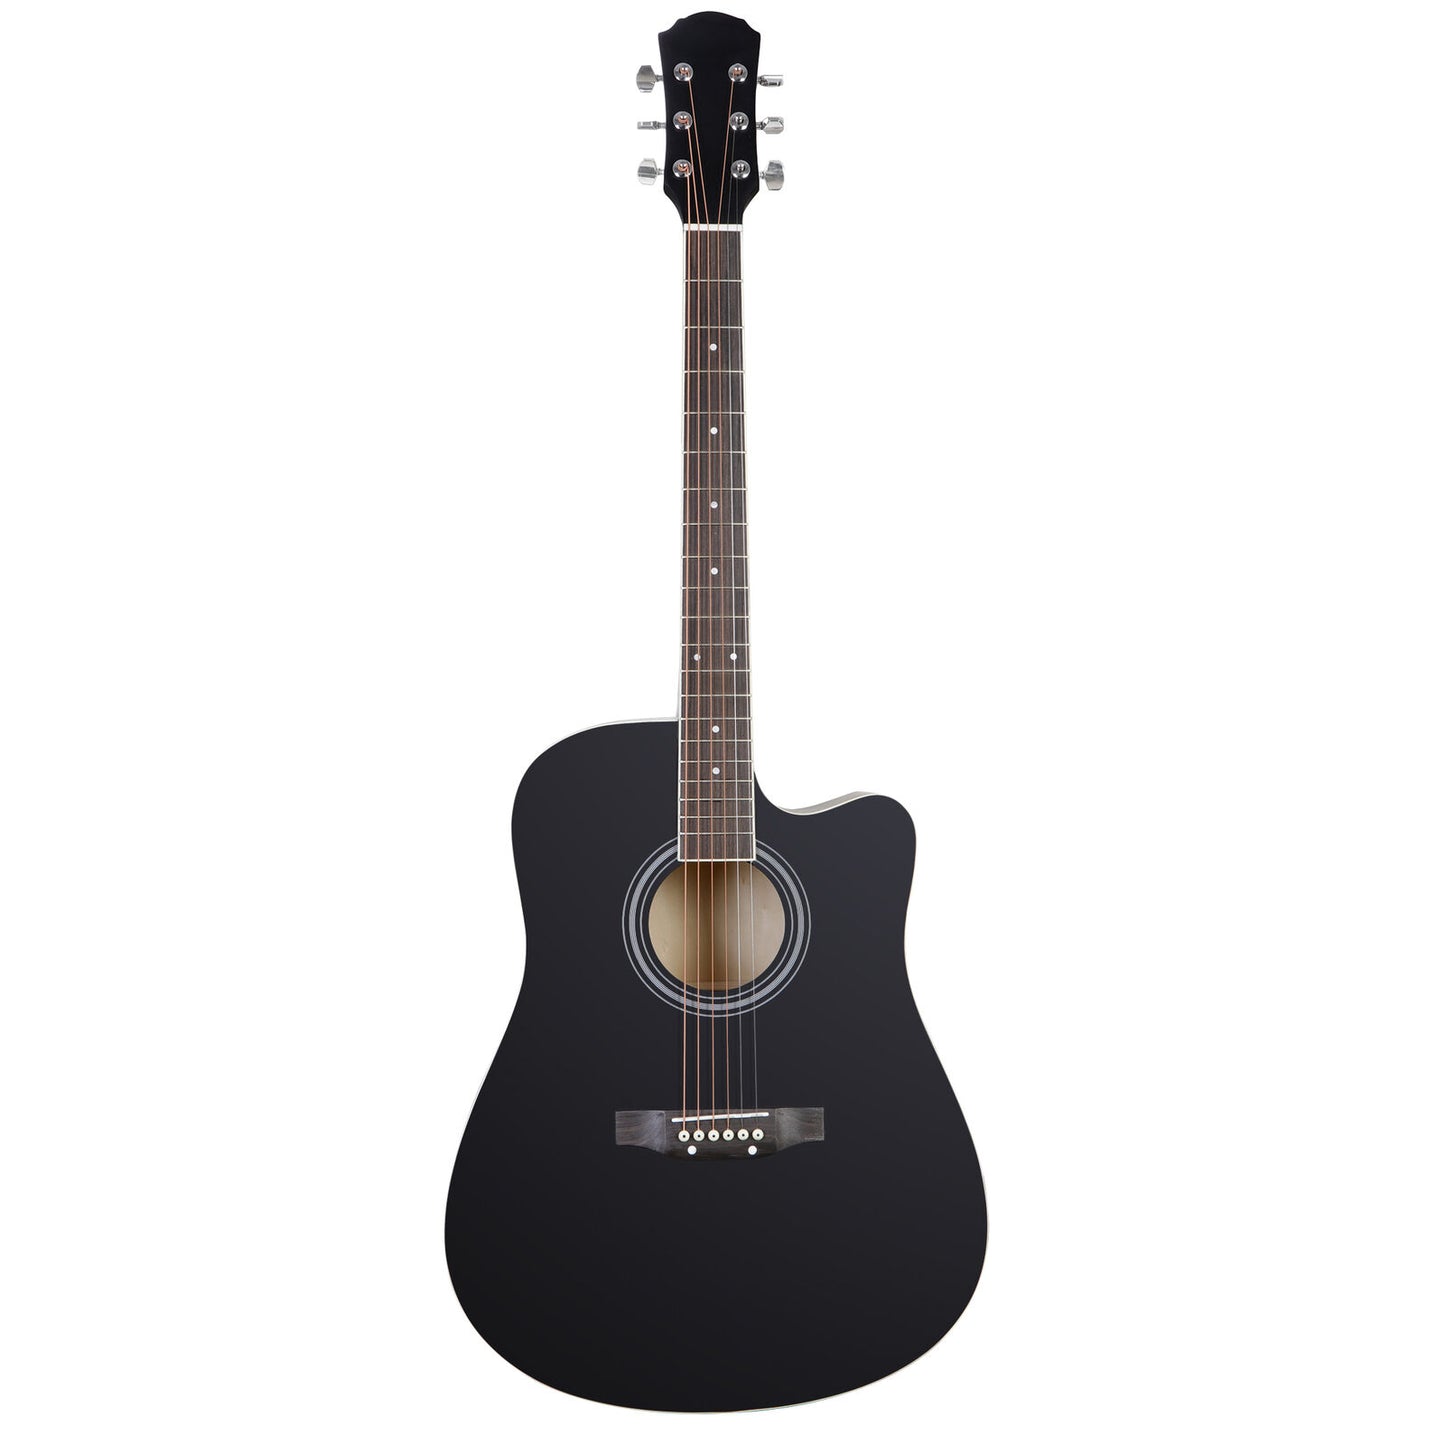 Black 41" Full Size Beginner Acoustic Guitar with Case Strap Capo Strings Tuner